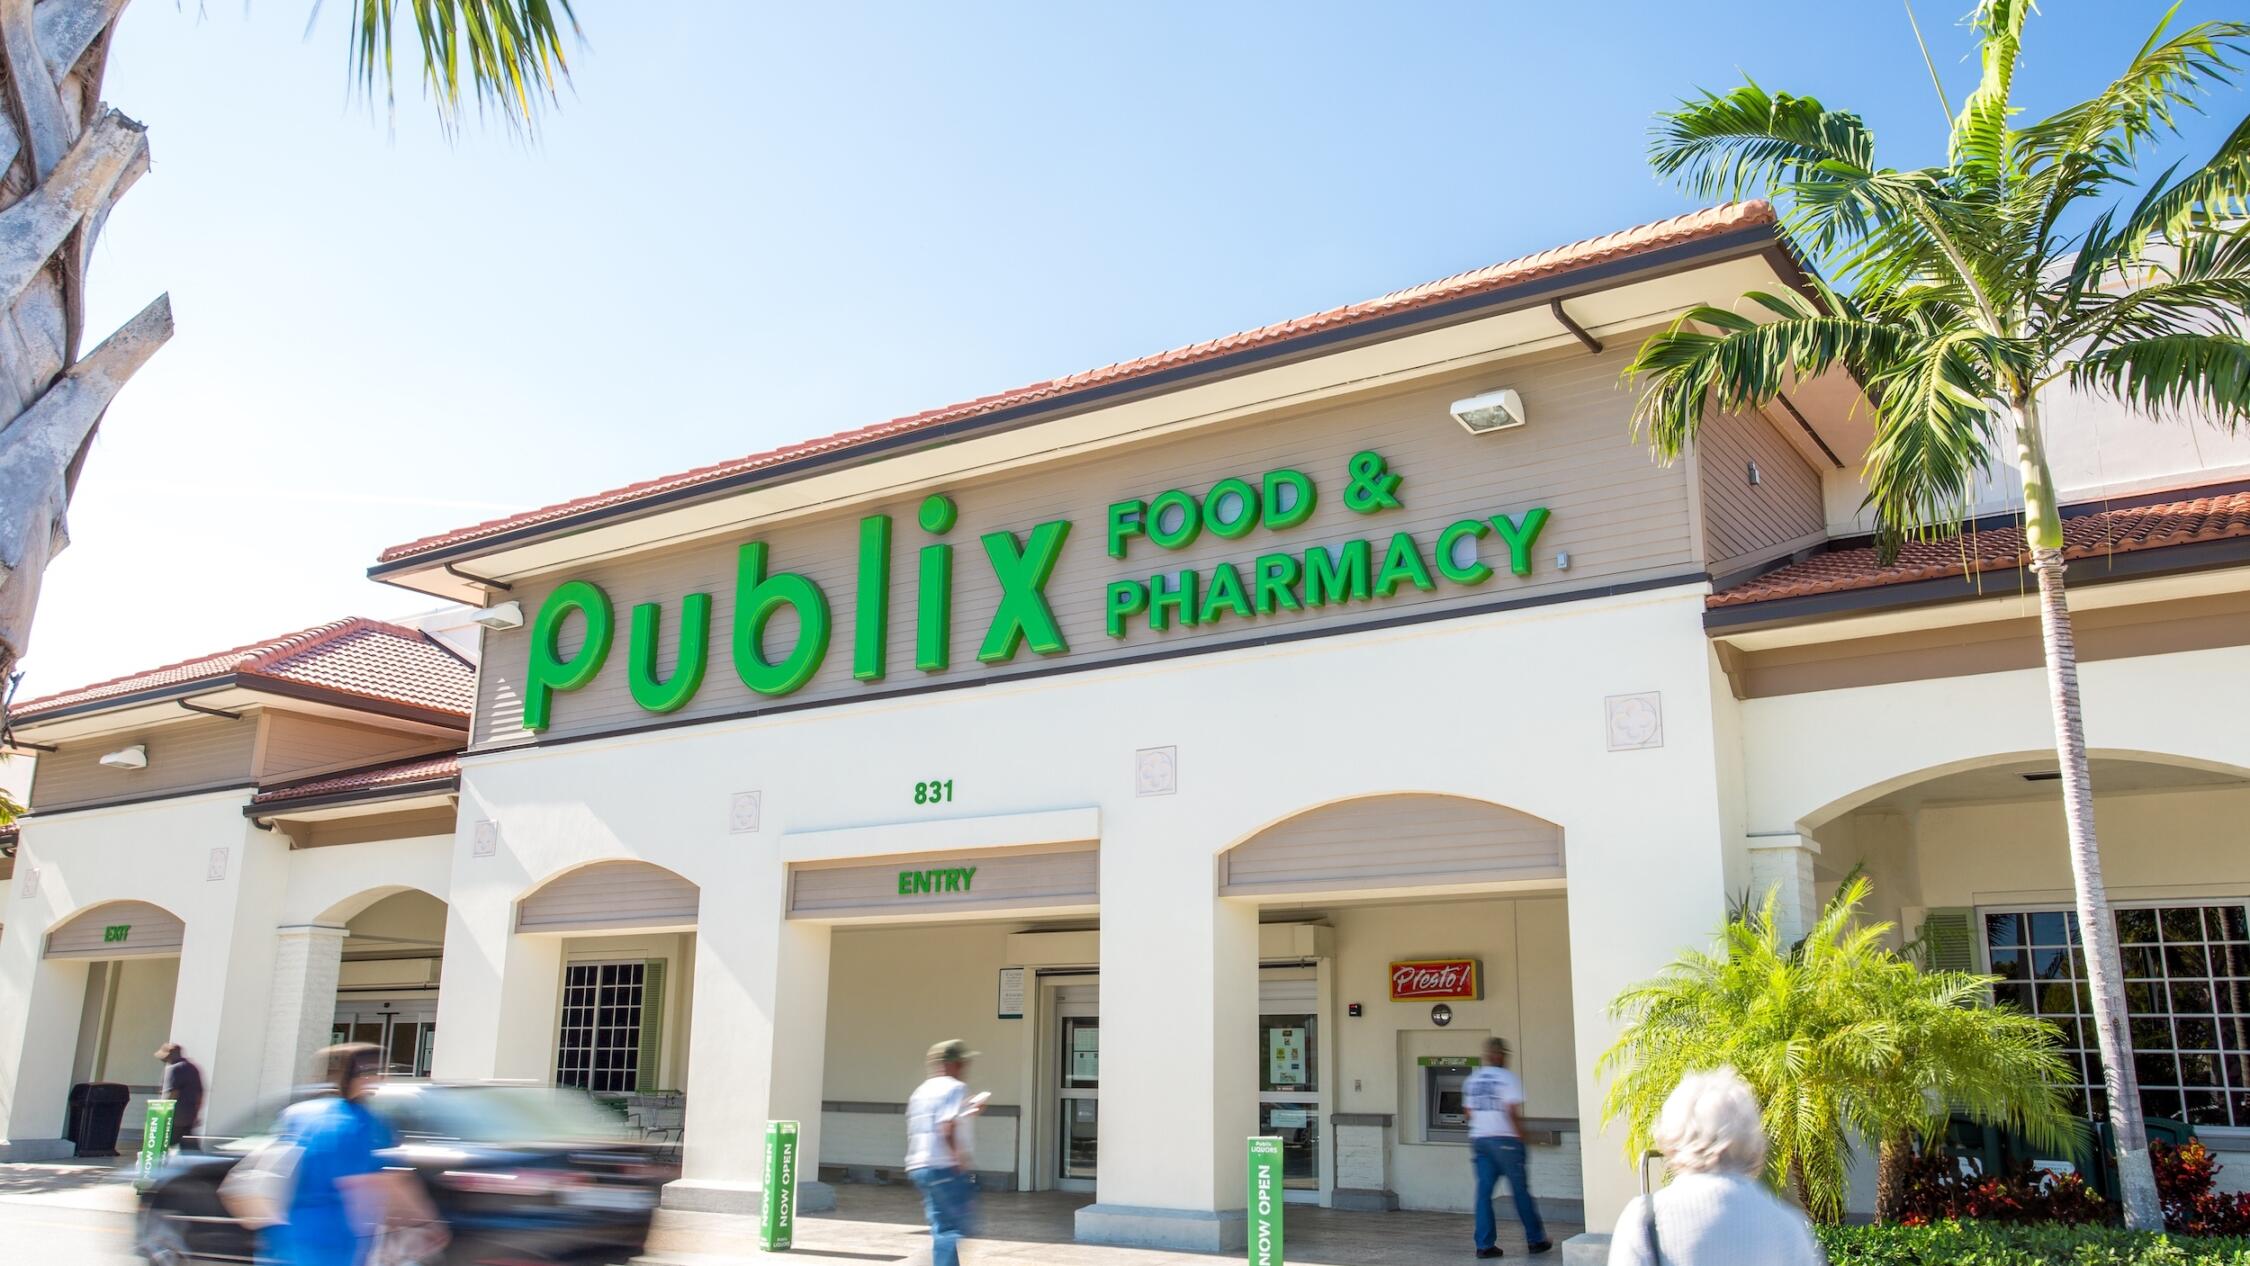 Exterior street level view of Publix grocery store at Village Commons with people and cars passing by